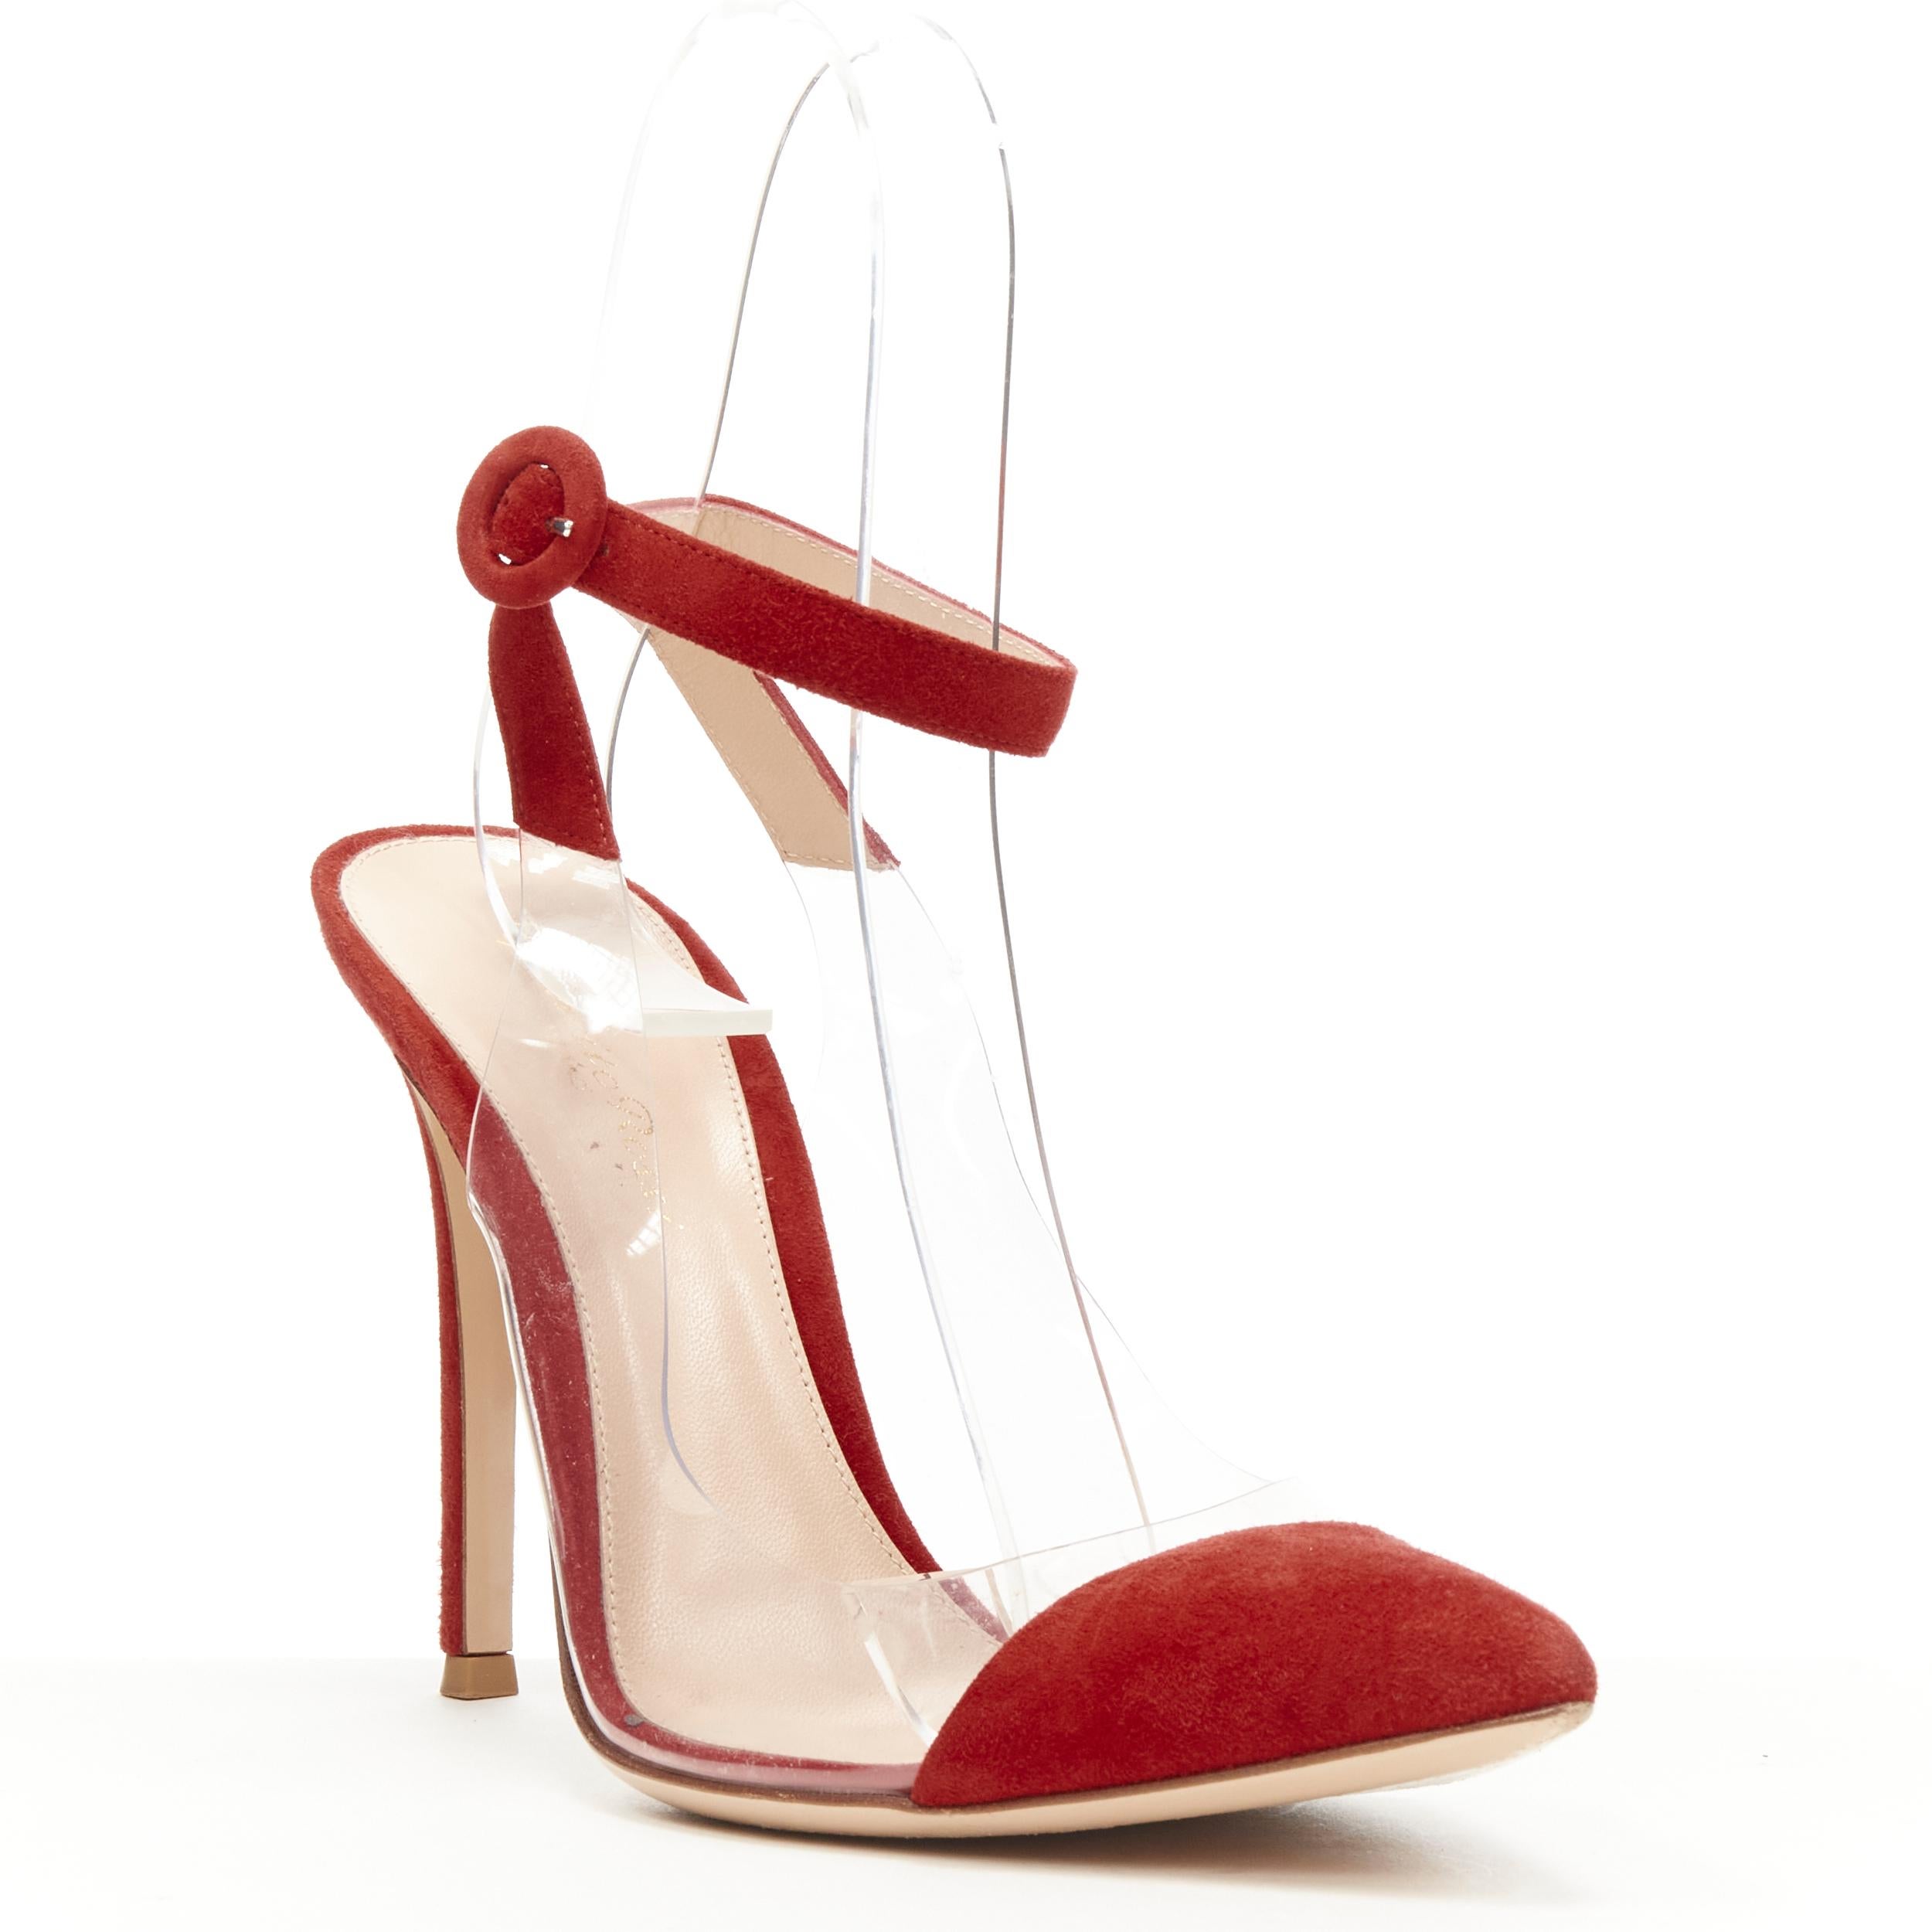 GIANVITO ROSSI Plexi red suede clear PVC ankle strap pump EU38.5 
Reference: KEDG/A00126 
Brand: Gianvito Rossi 
Model: Plexi 
Material: PVC 
Color: Red
Pattern: Solid 
Closure: Ankle Strap 
Made in: Italy 


CONDITION: 
Condition: Very good, this